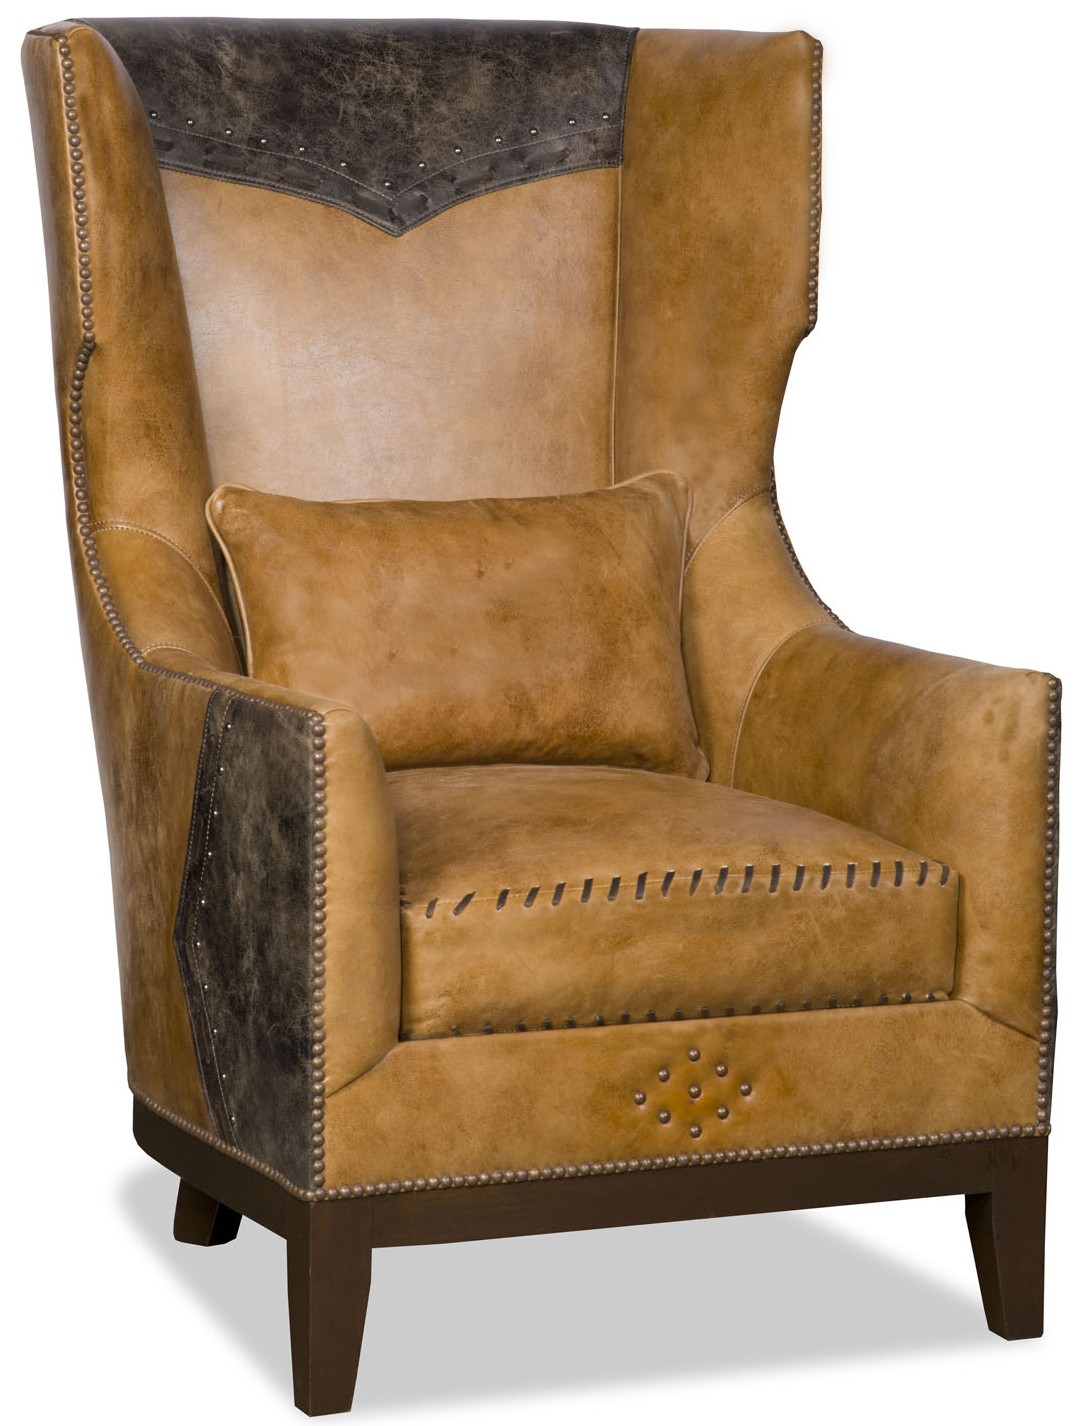 CHAIRS, Leather, Upholstered, Accent Western style wing backed chair